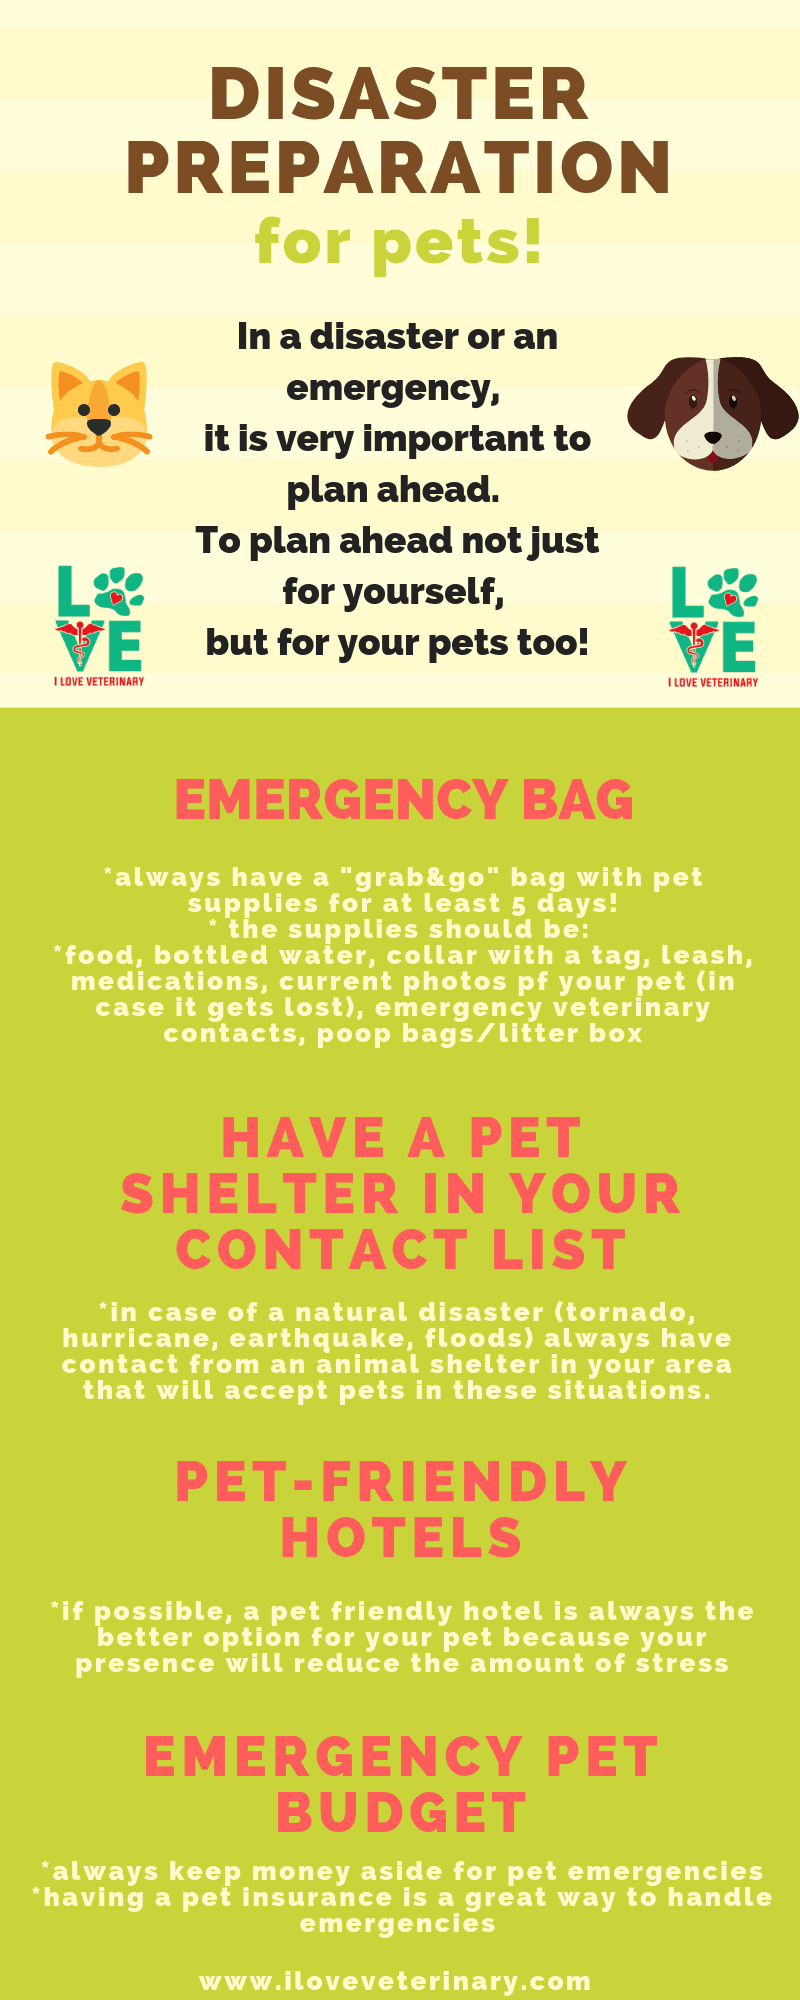 Disaster preparation for pets infographic